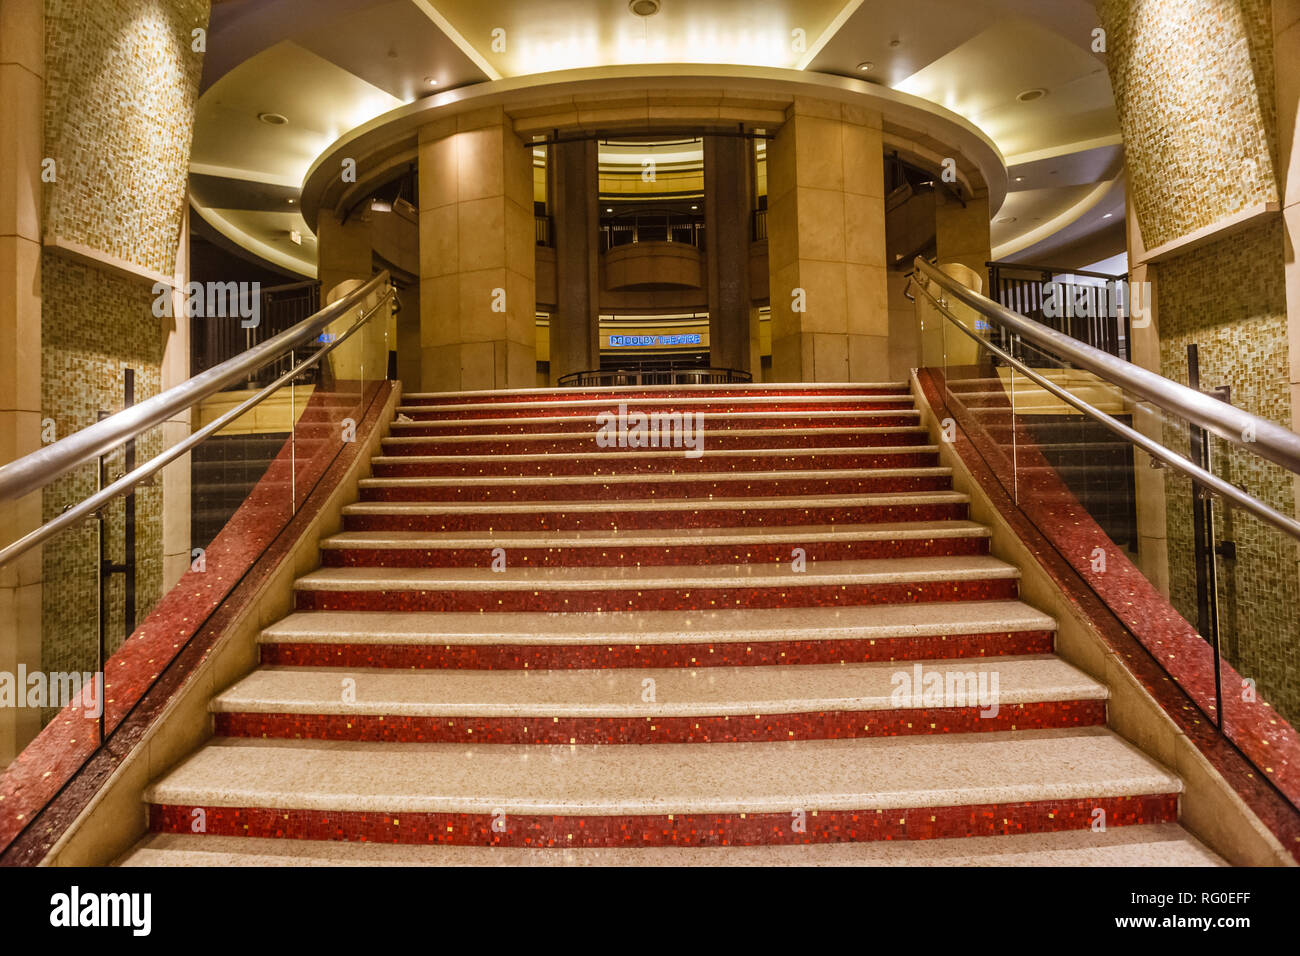 Hollywood, CA - Aug 13, 2018: Famous staircase of Dolby Theater in Hollywoo Los Angees. Dolby Theater is a place where Oscar ceremony is held every ye Stock Photo